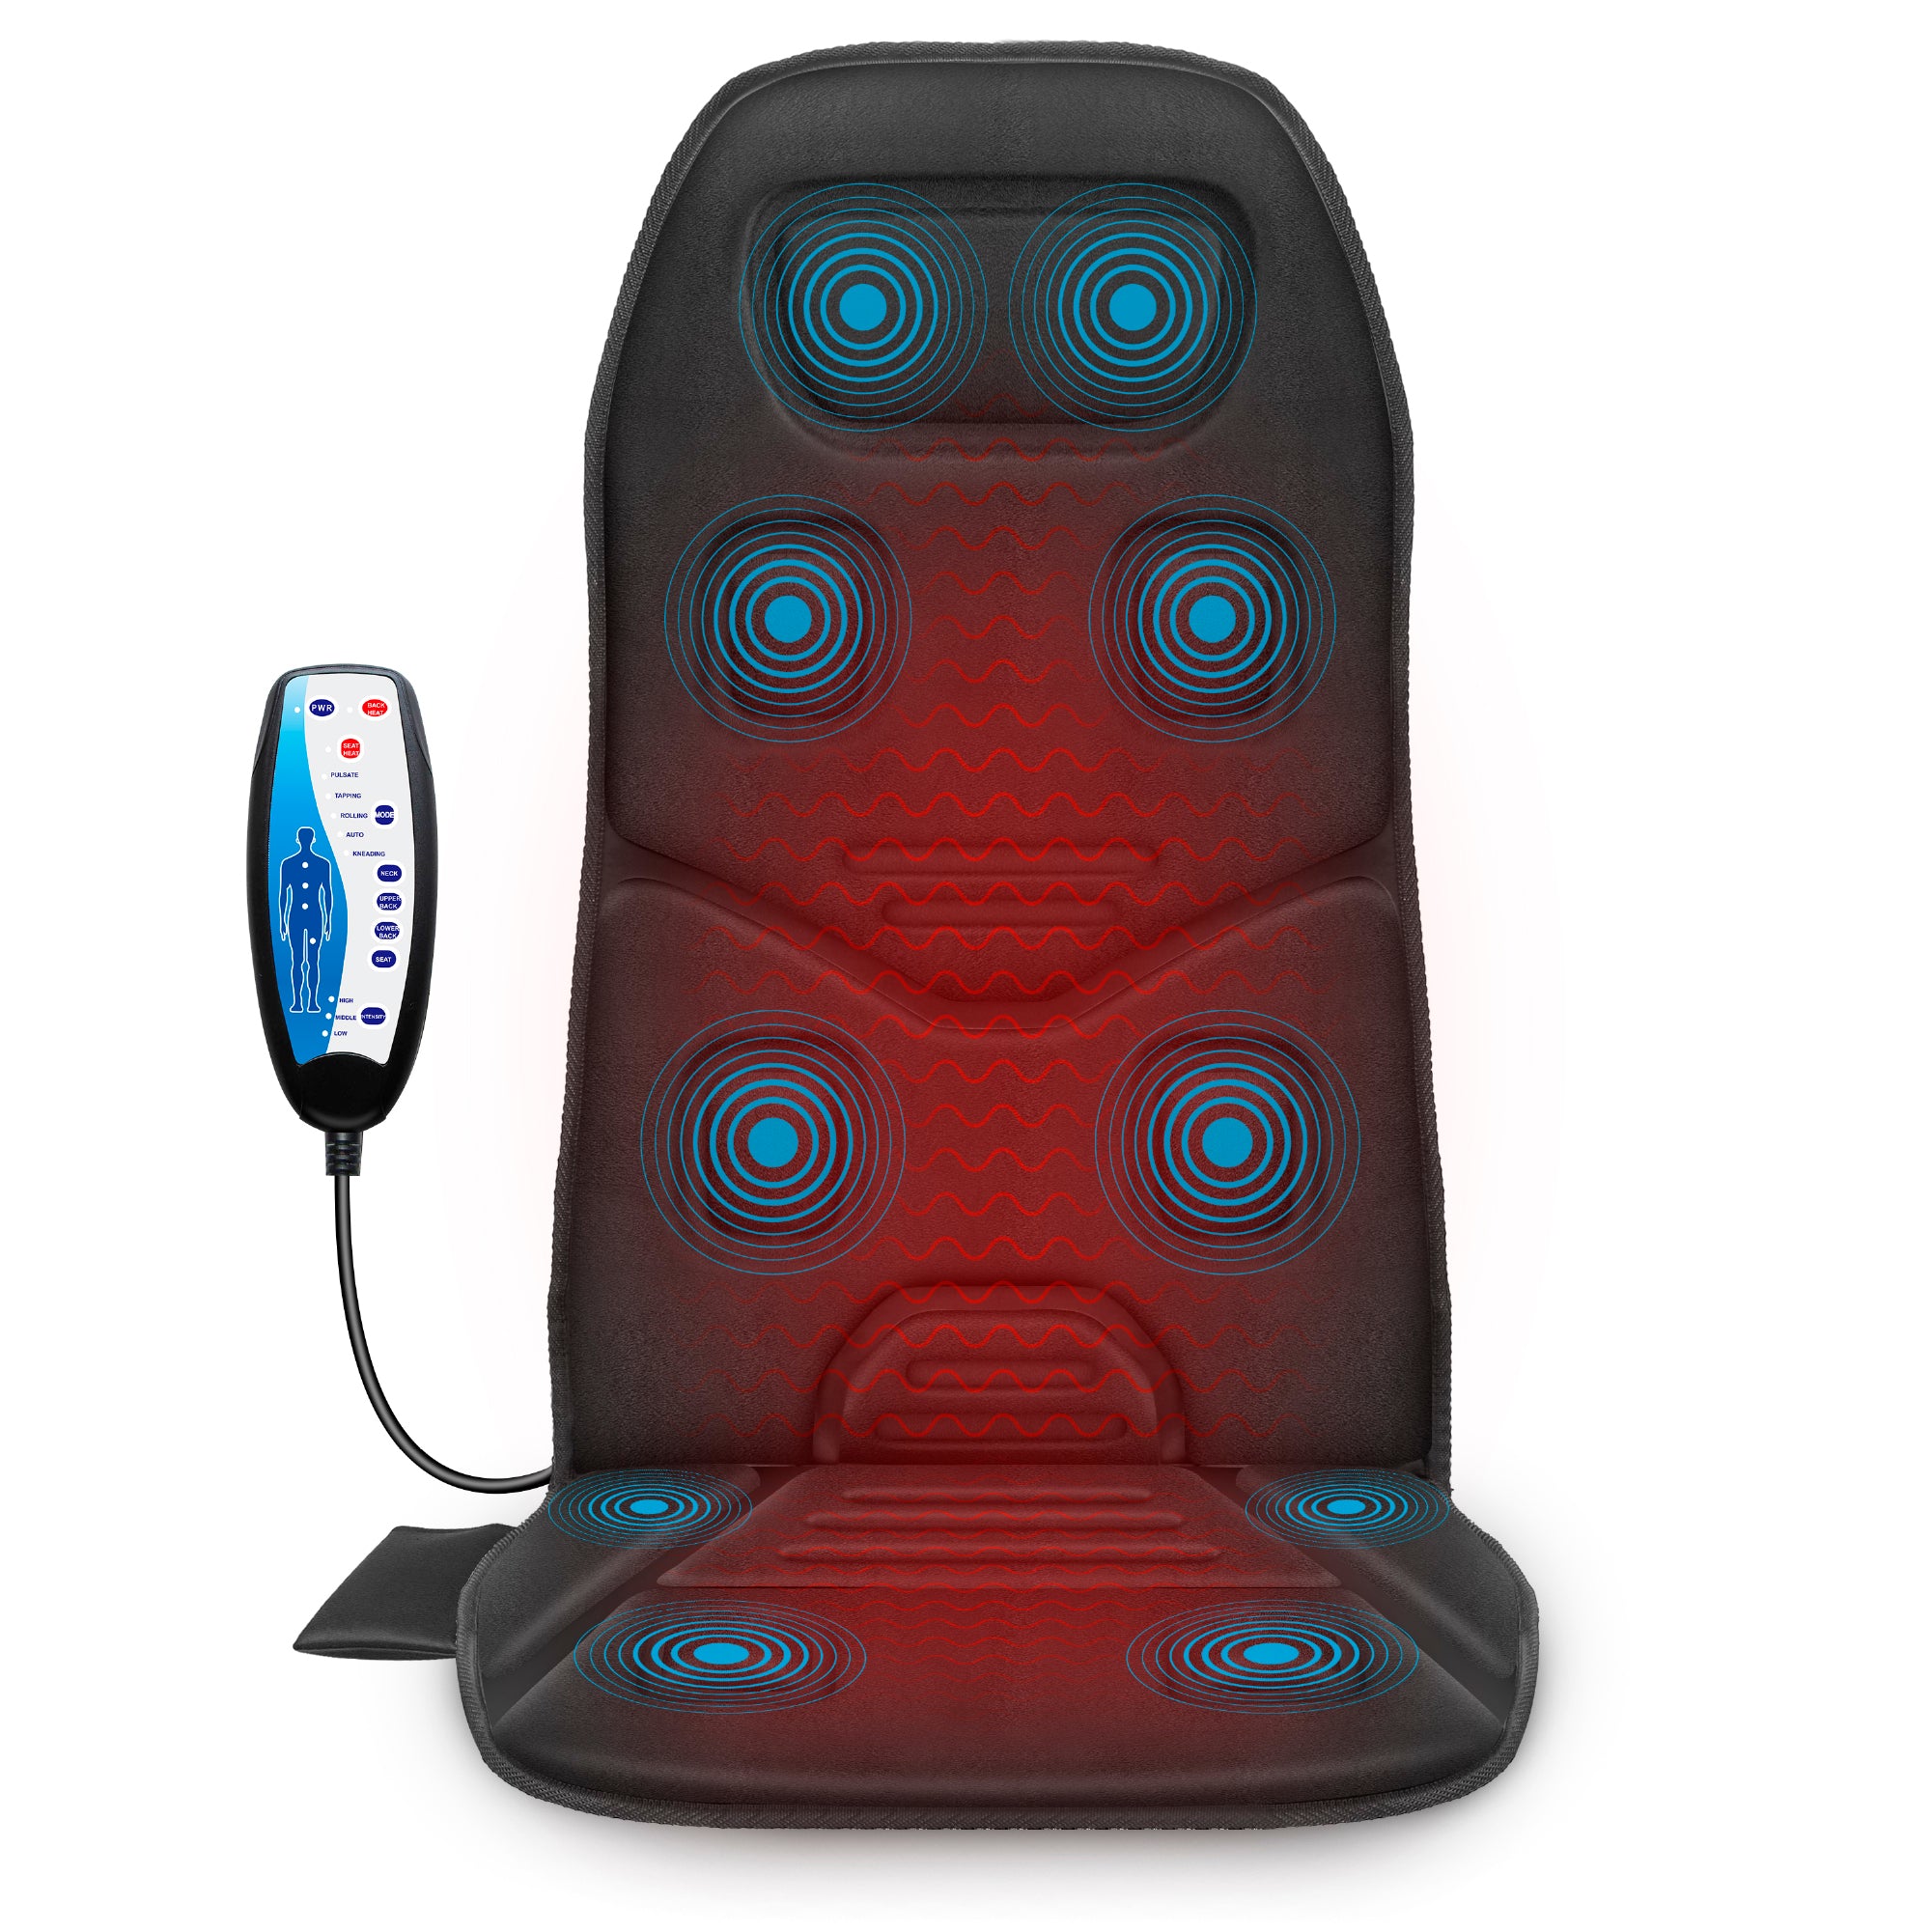 Comfier Vibration Back Massage Cushion with Heat,Massage Pad for Home